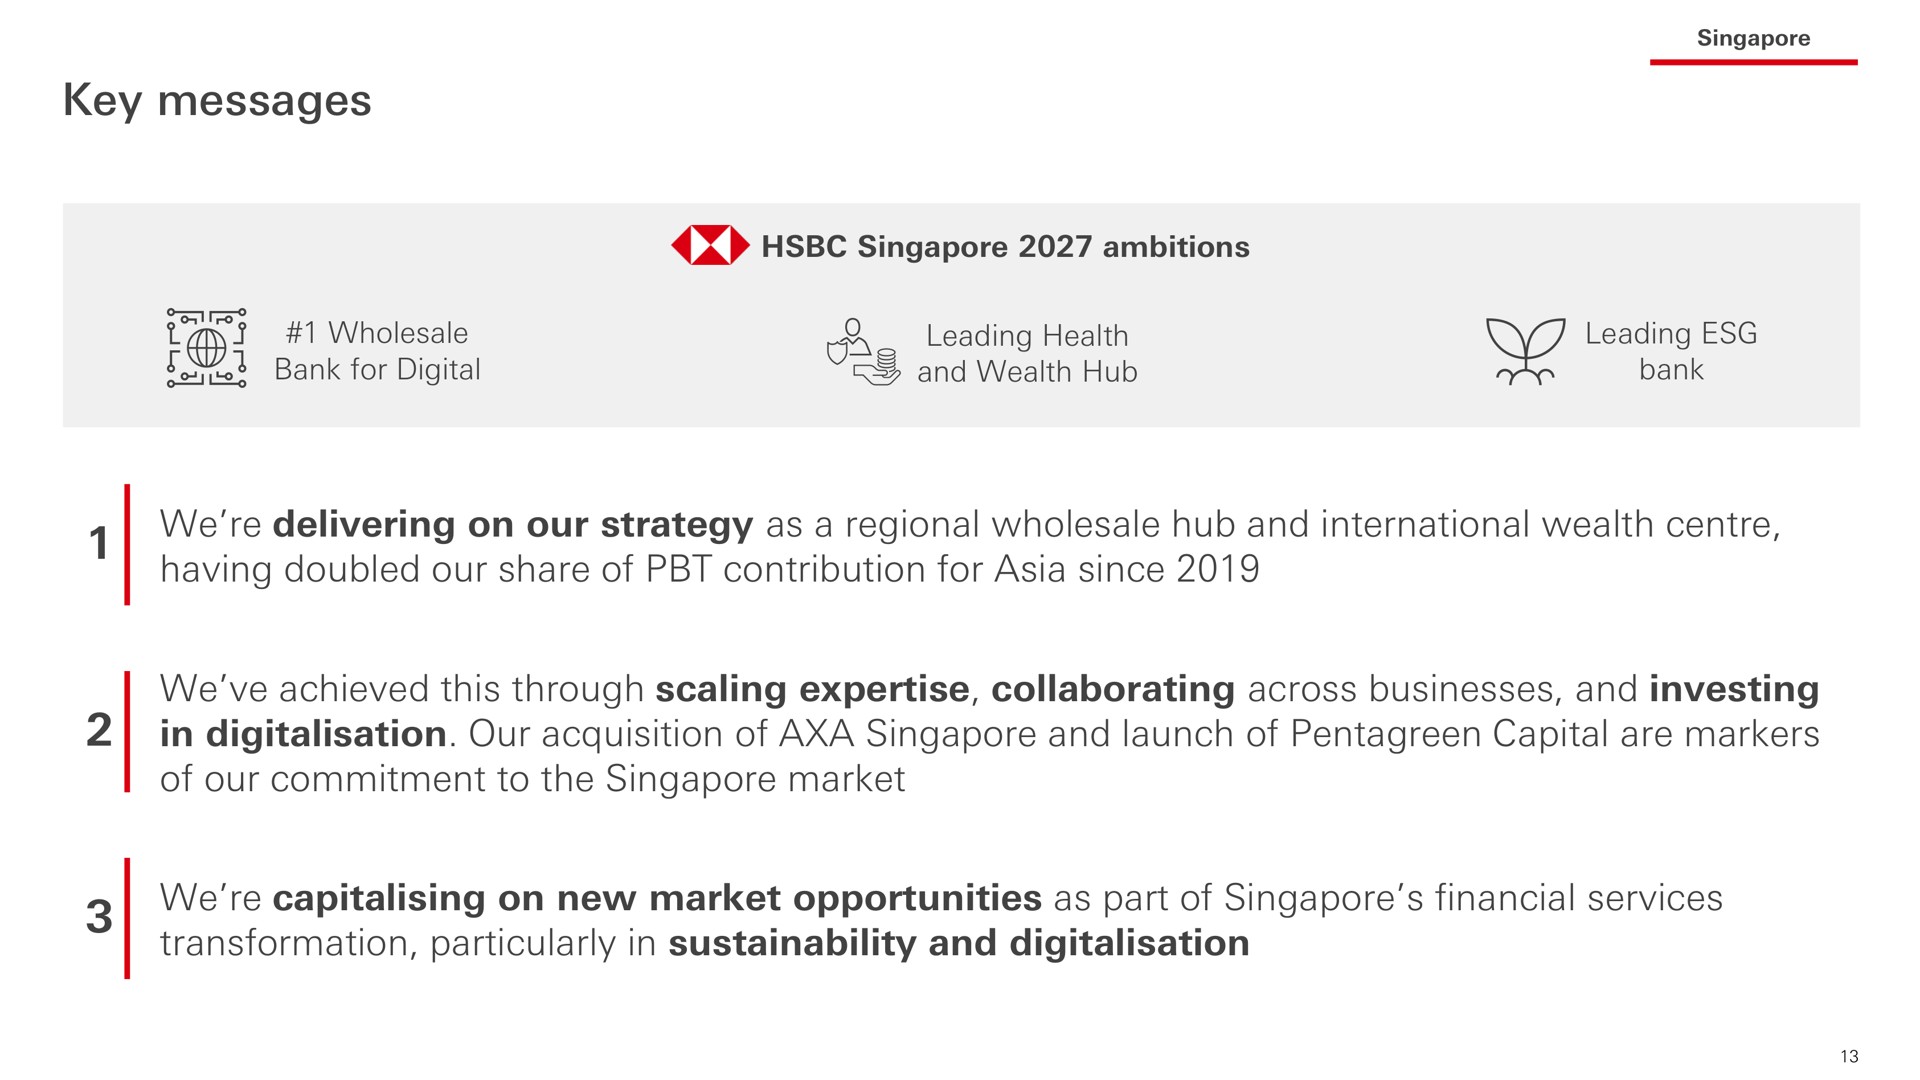 key messages wholesale cay bes bank for digital a leading health and wealth hub leading bank | HSBC